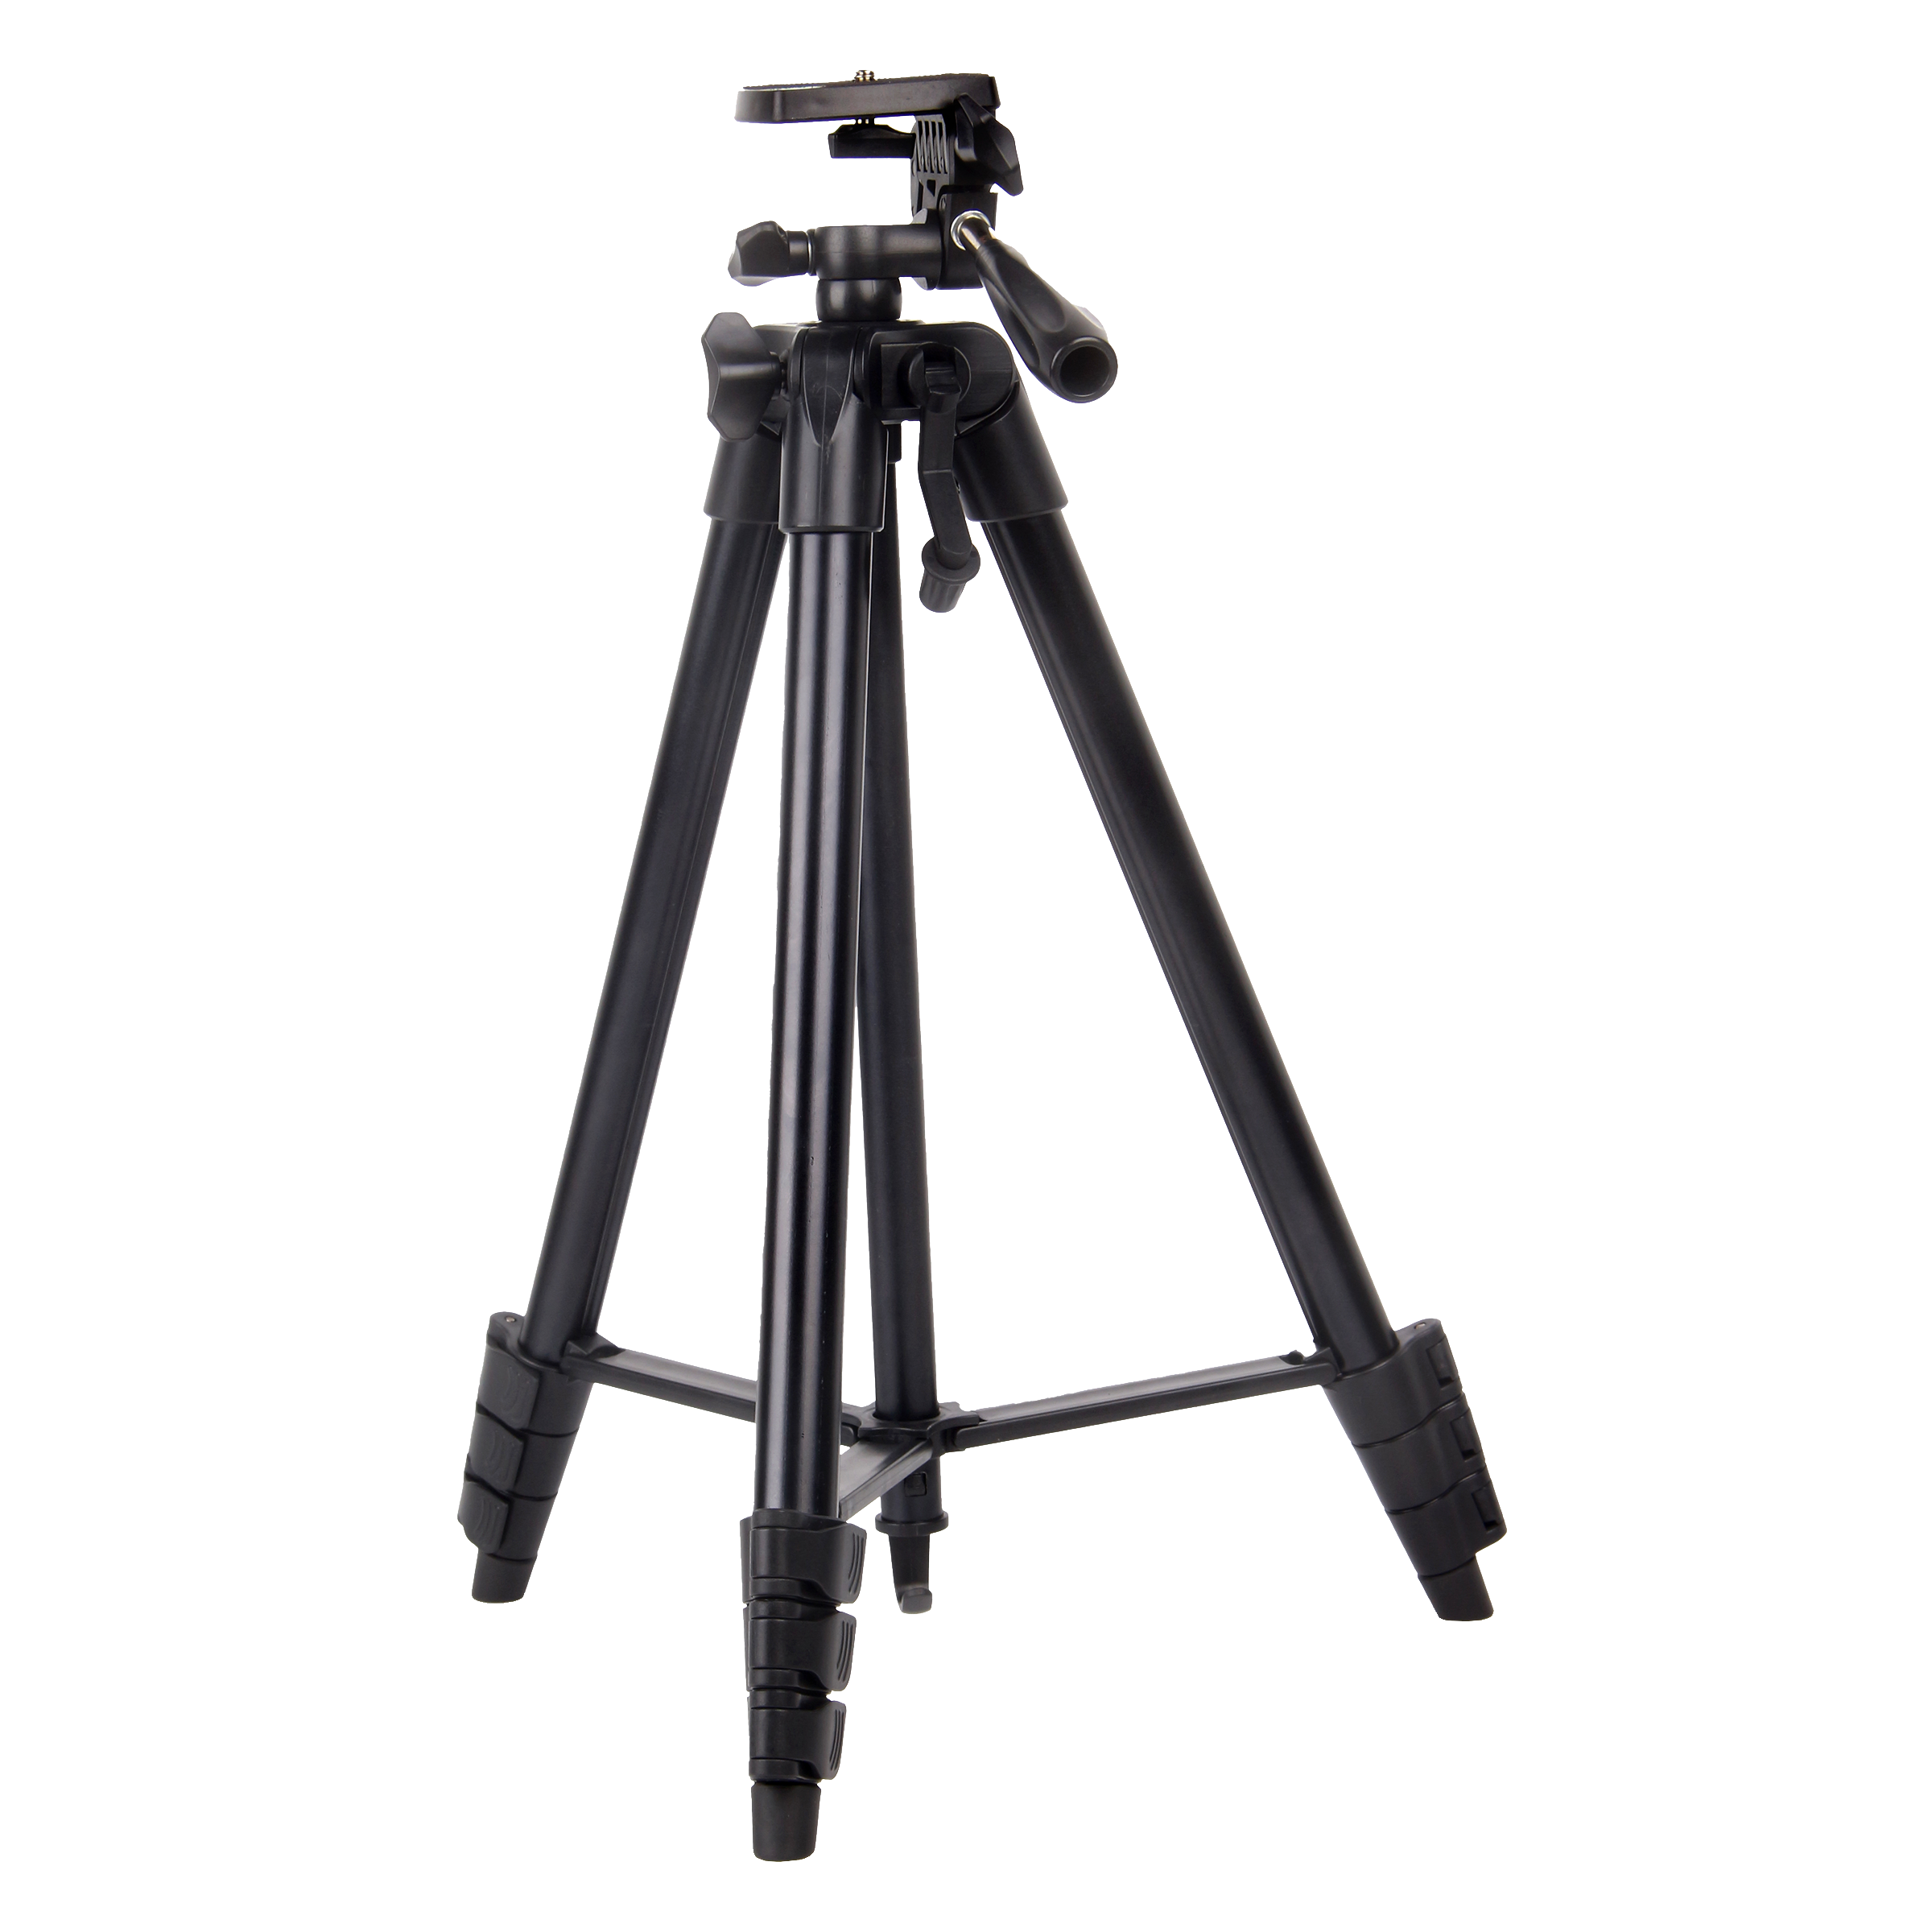 Croma 134cm Adjustable Tripod for Mobile and Camera (Axis Lock, Black)